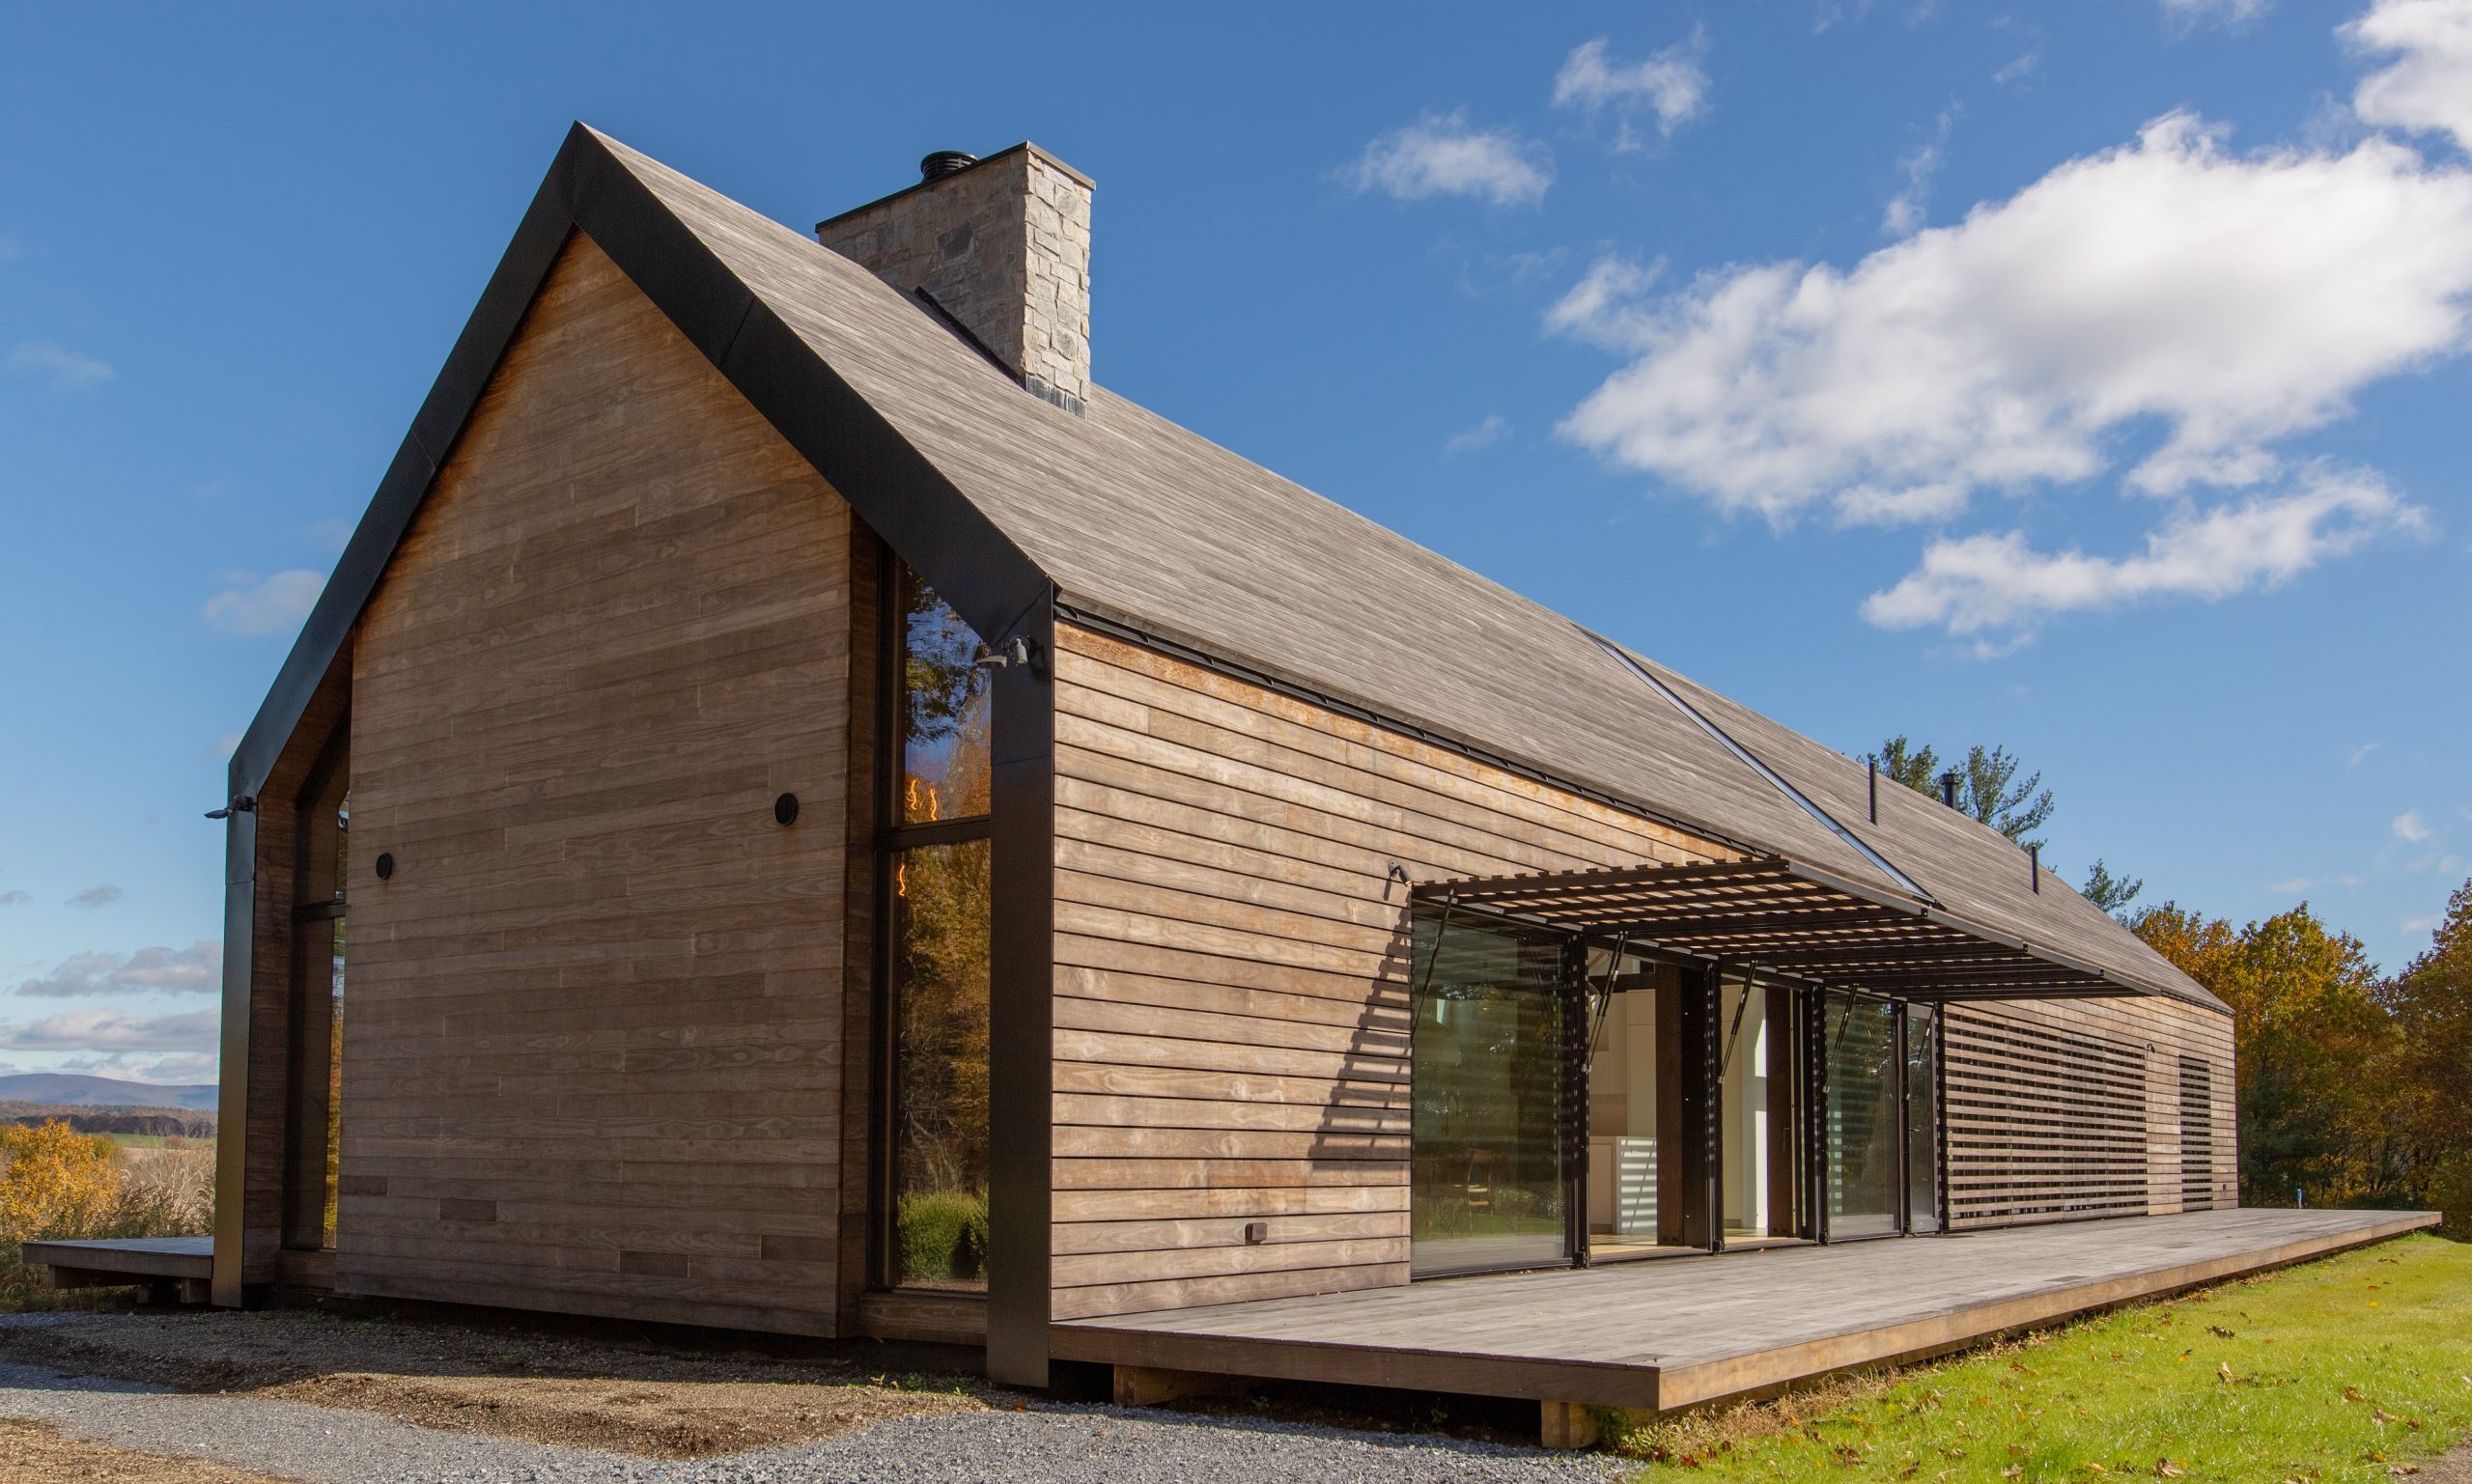 Three-quarter view of the modern Silvernail's Family House property featuring Kebony Modified Wood Clear Cladding located in Rhinebeck, New York on a sunny day